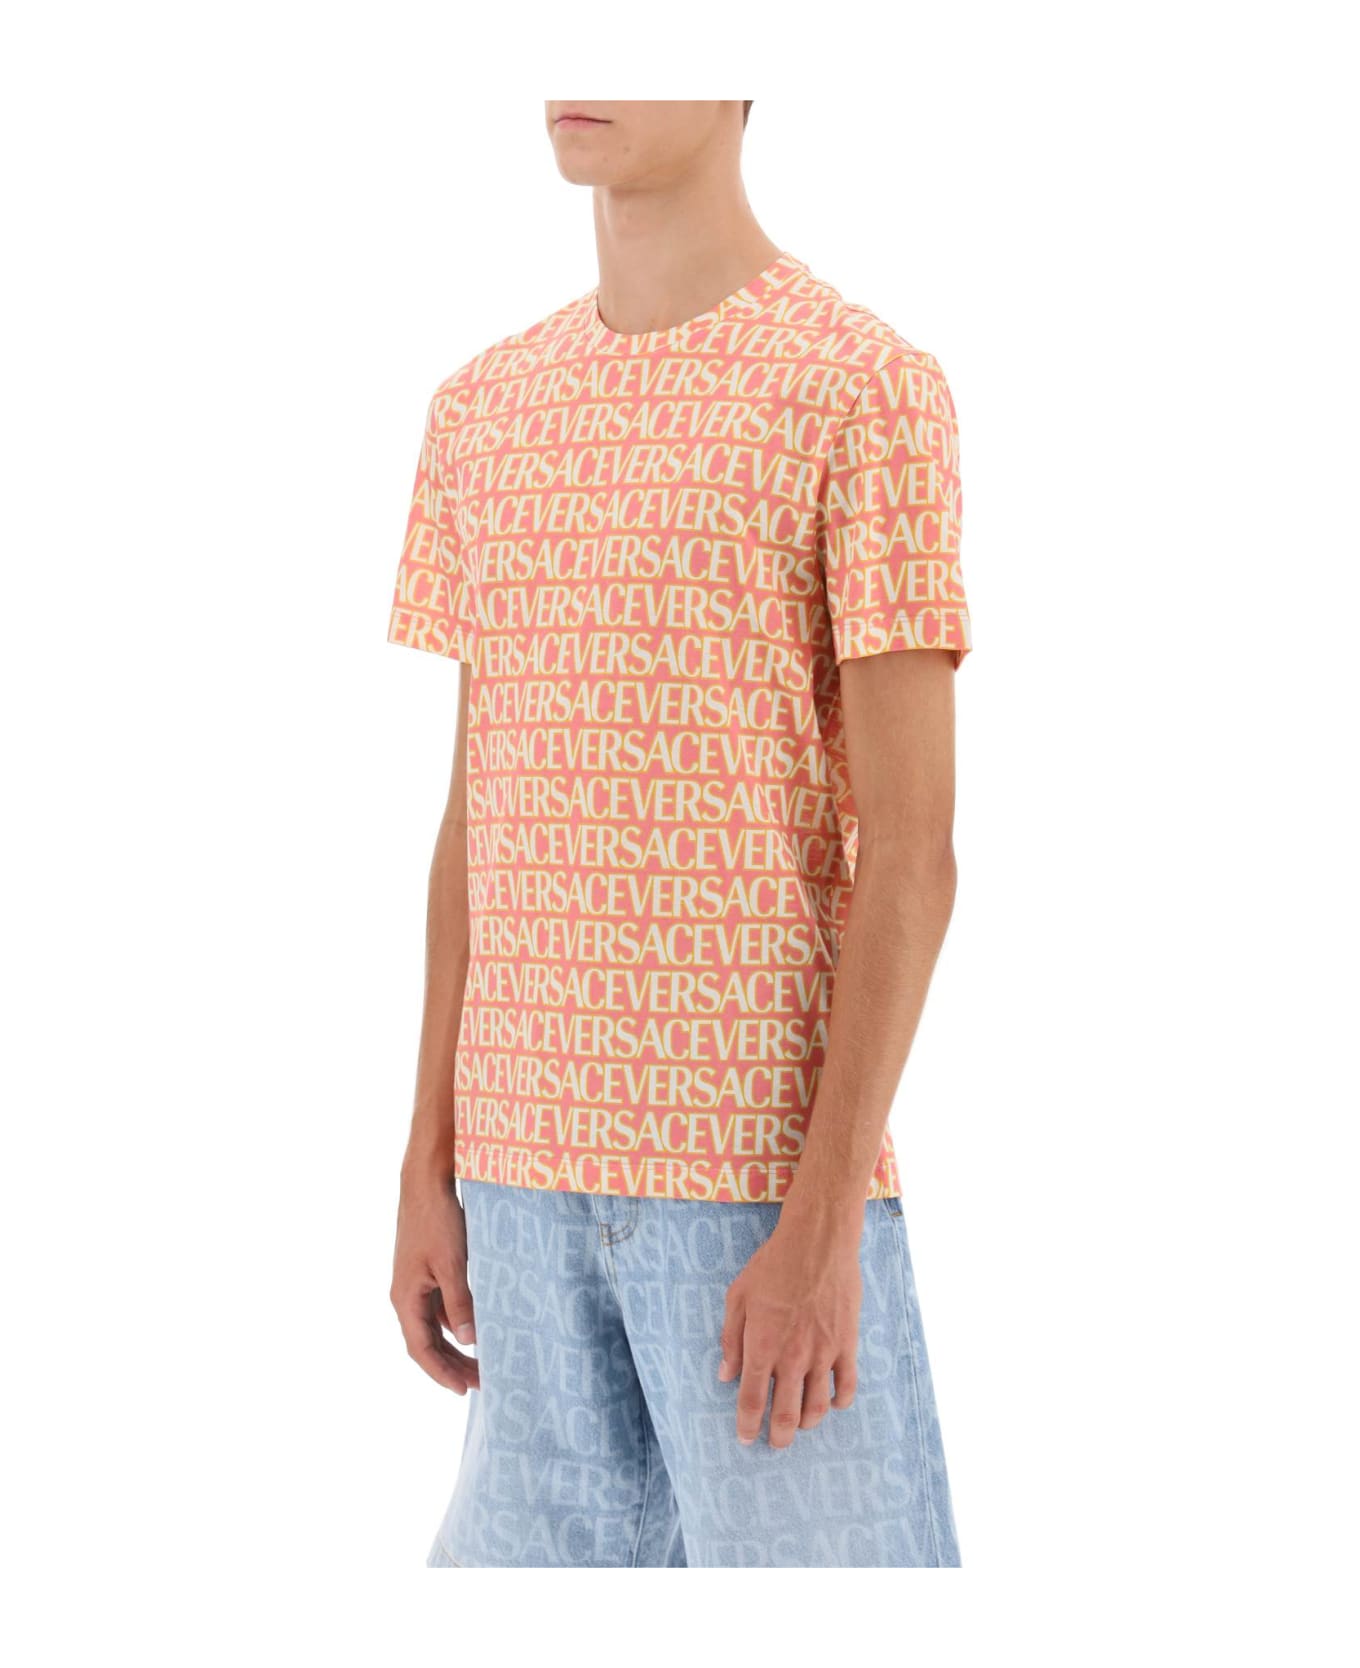 Versace Allover T-shirt - PINK IVORY (White) シャツ